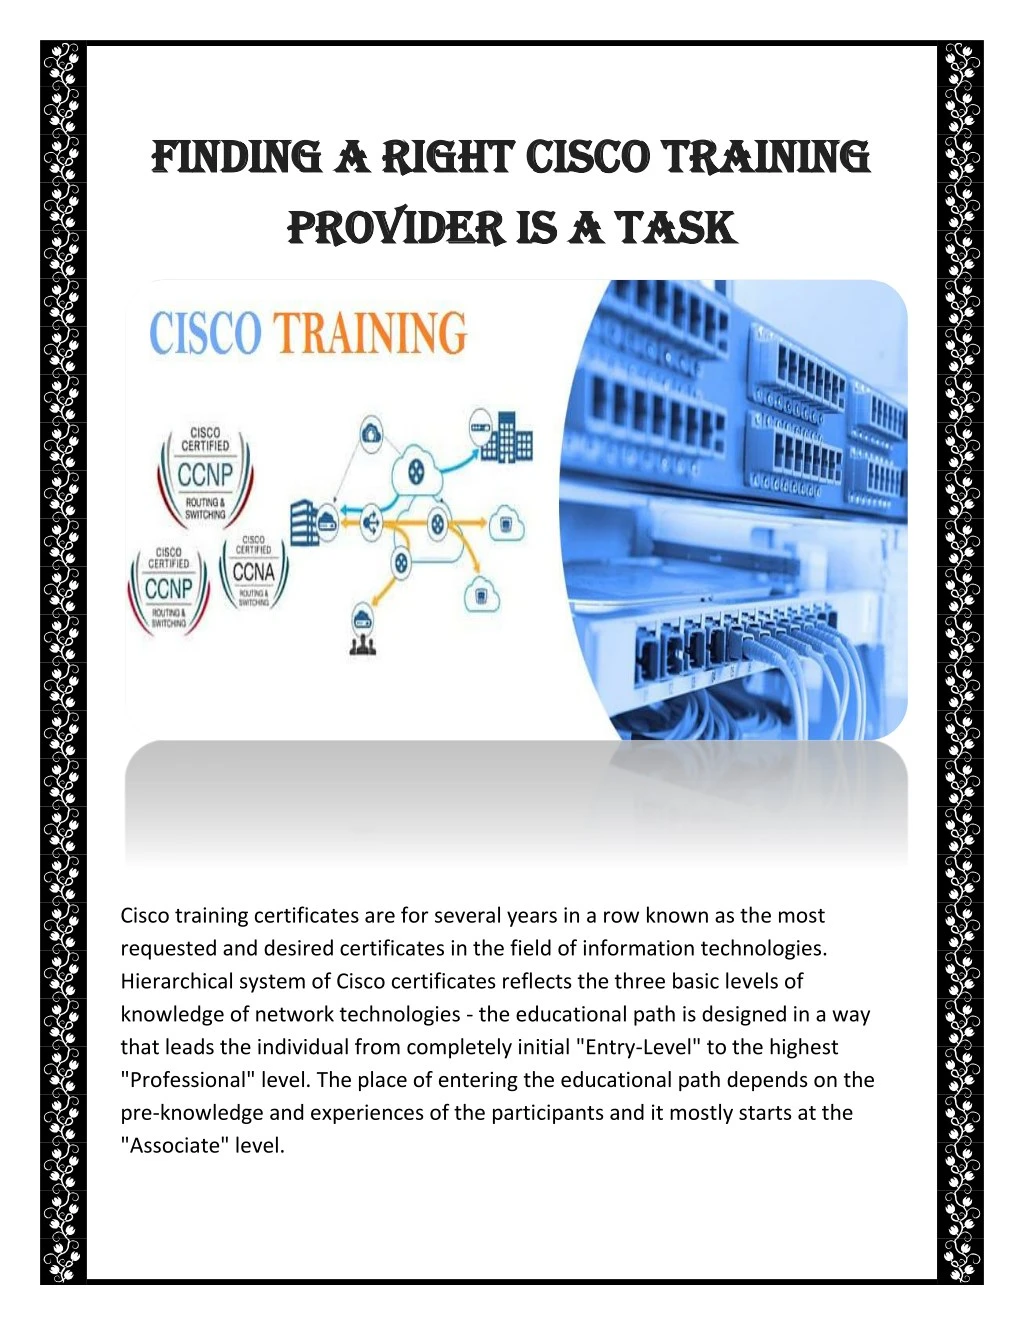 finding a right cisco training finding a right